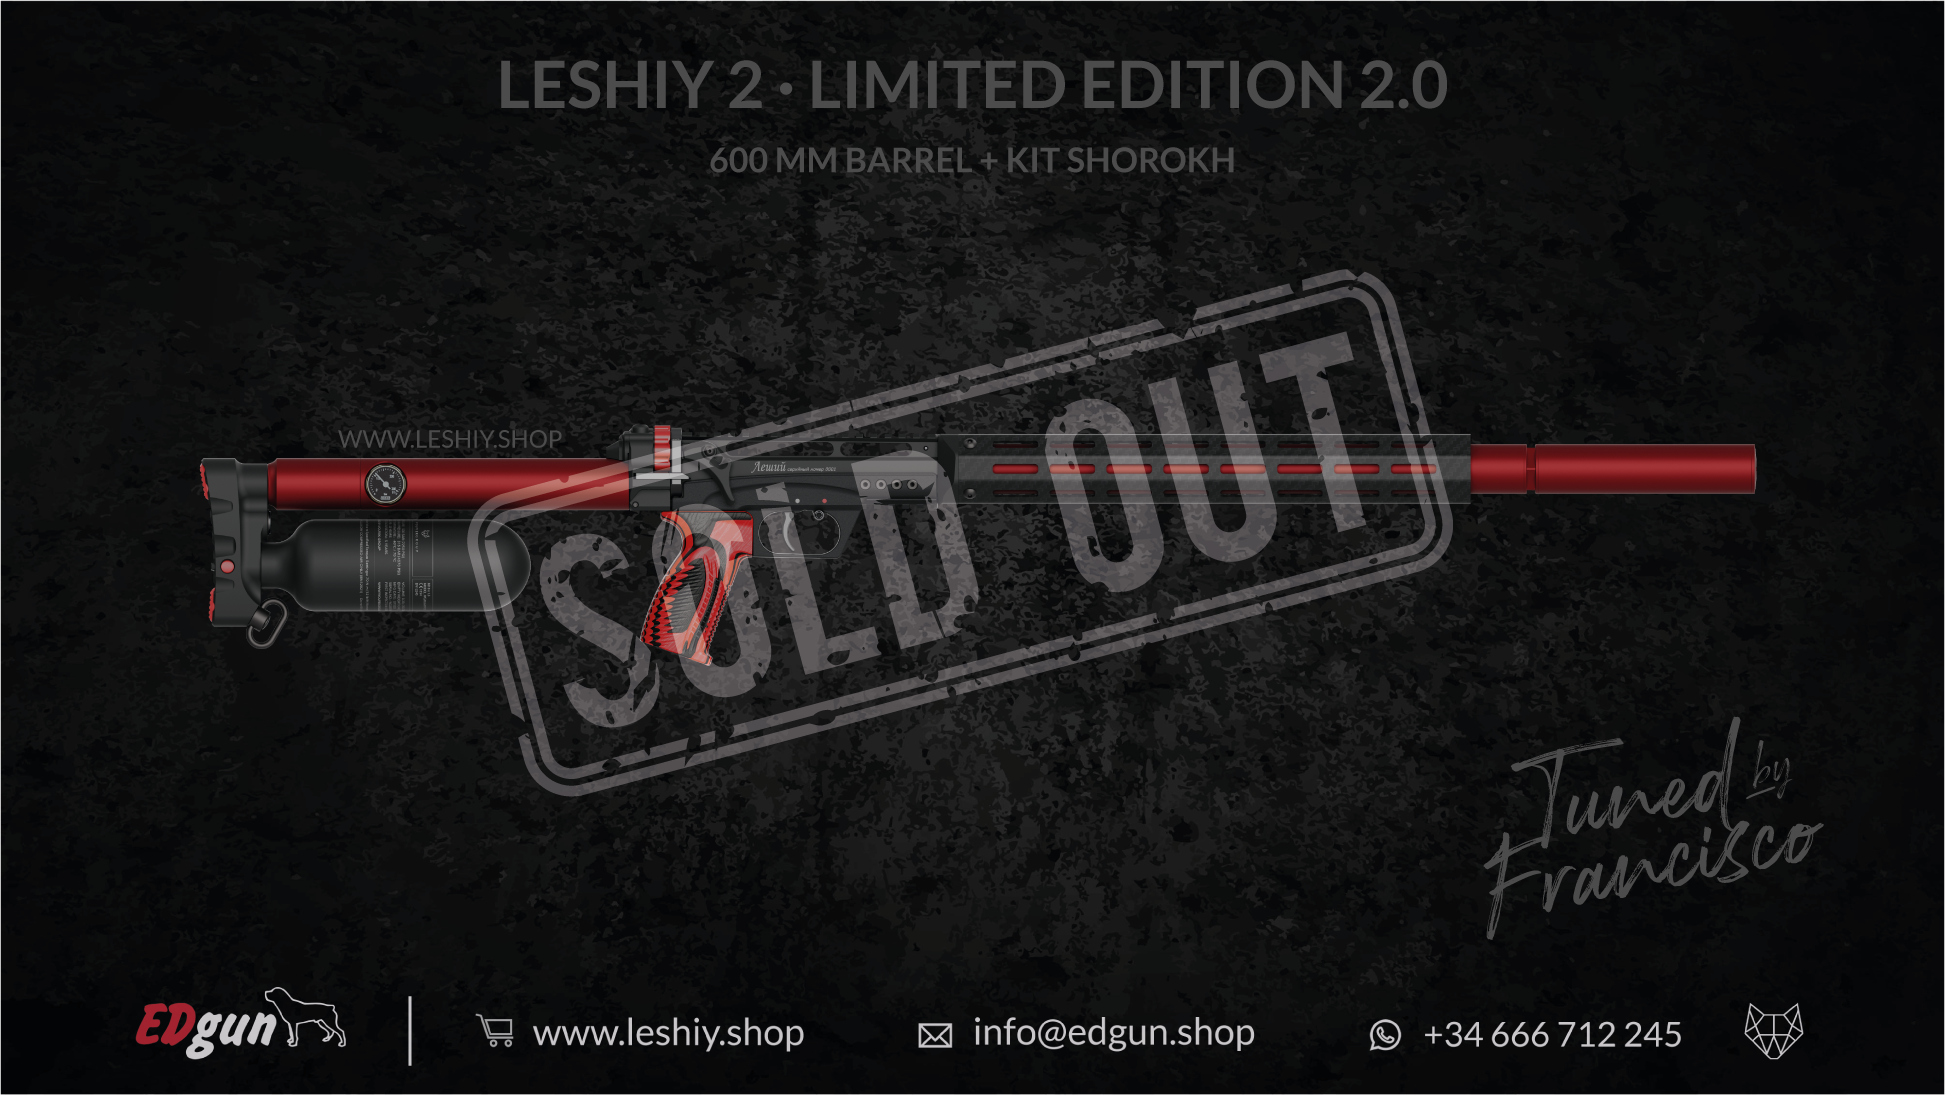 Leshiy 2 Limited Edition 2.0 Tuned by Francisco